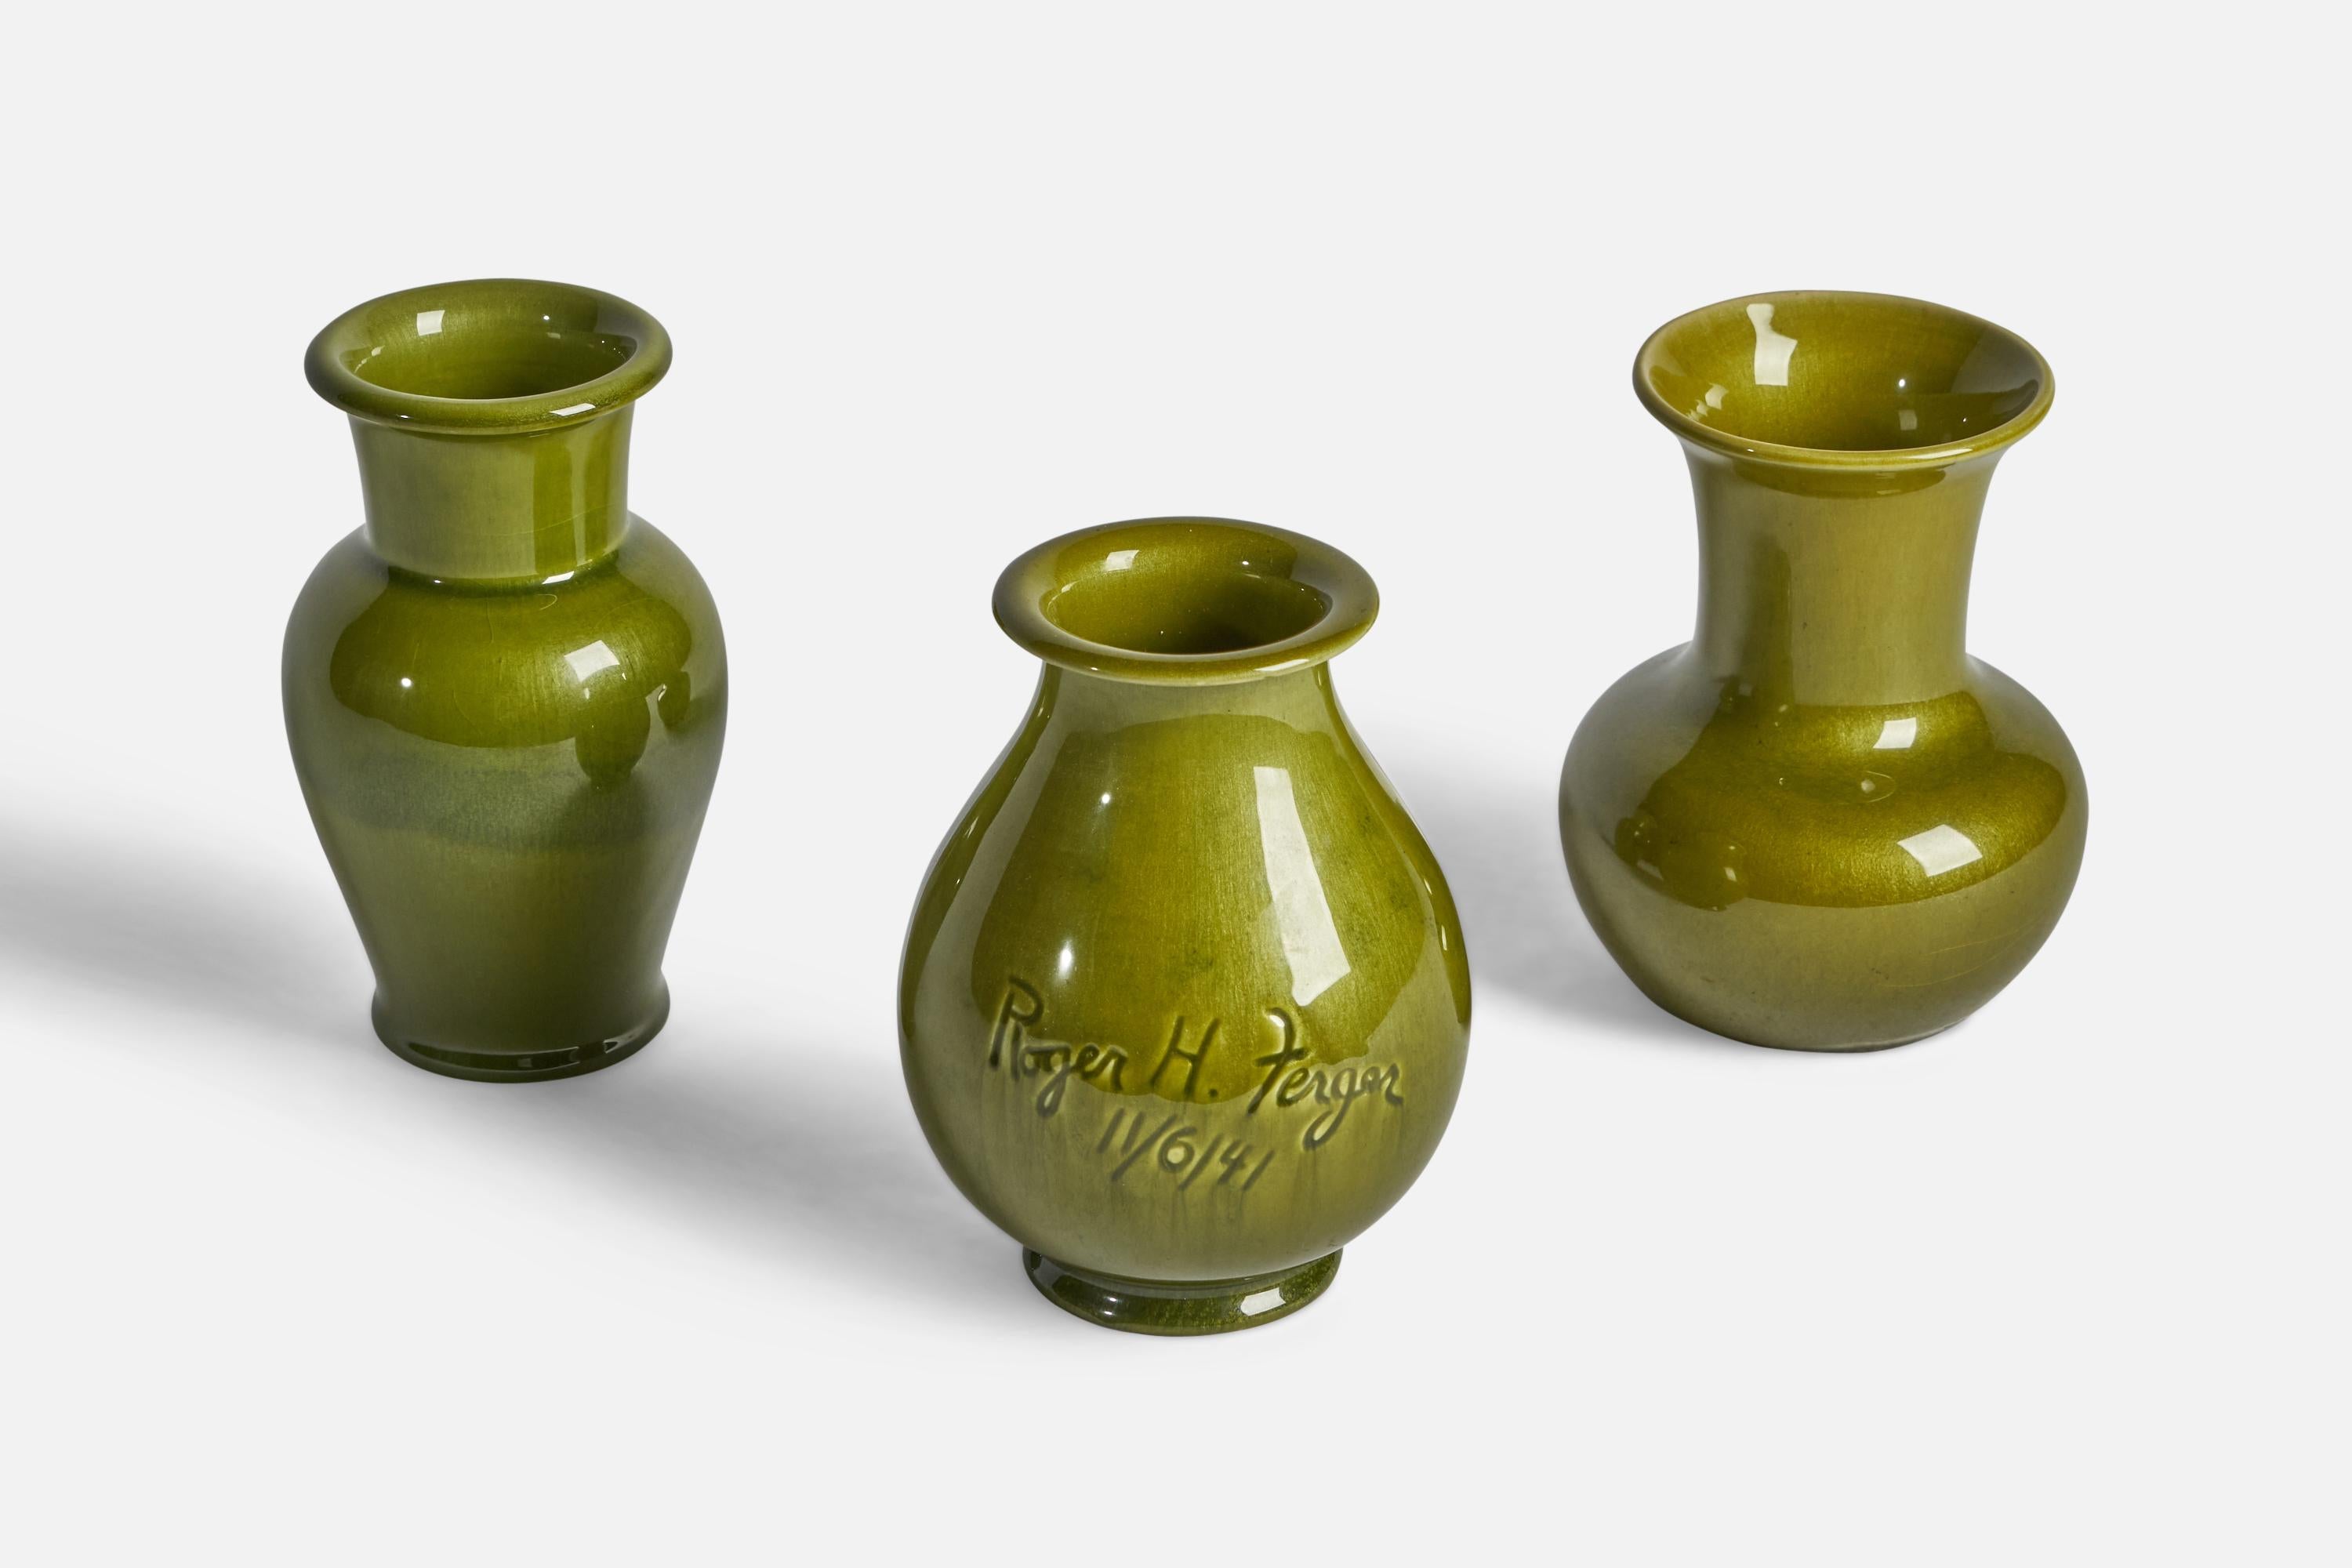 A set of three green-glazed porcelain vases designed and produced by Rookwood Pottery and Kenton Hills Porcelains respectively. One vase signed Roger H. Ferger and dated 1941.

Overall Dimensions (inches): 5.75” H x 4.5” Diameter
Overall Dimensions